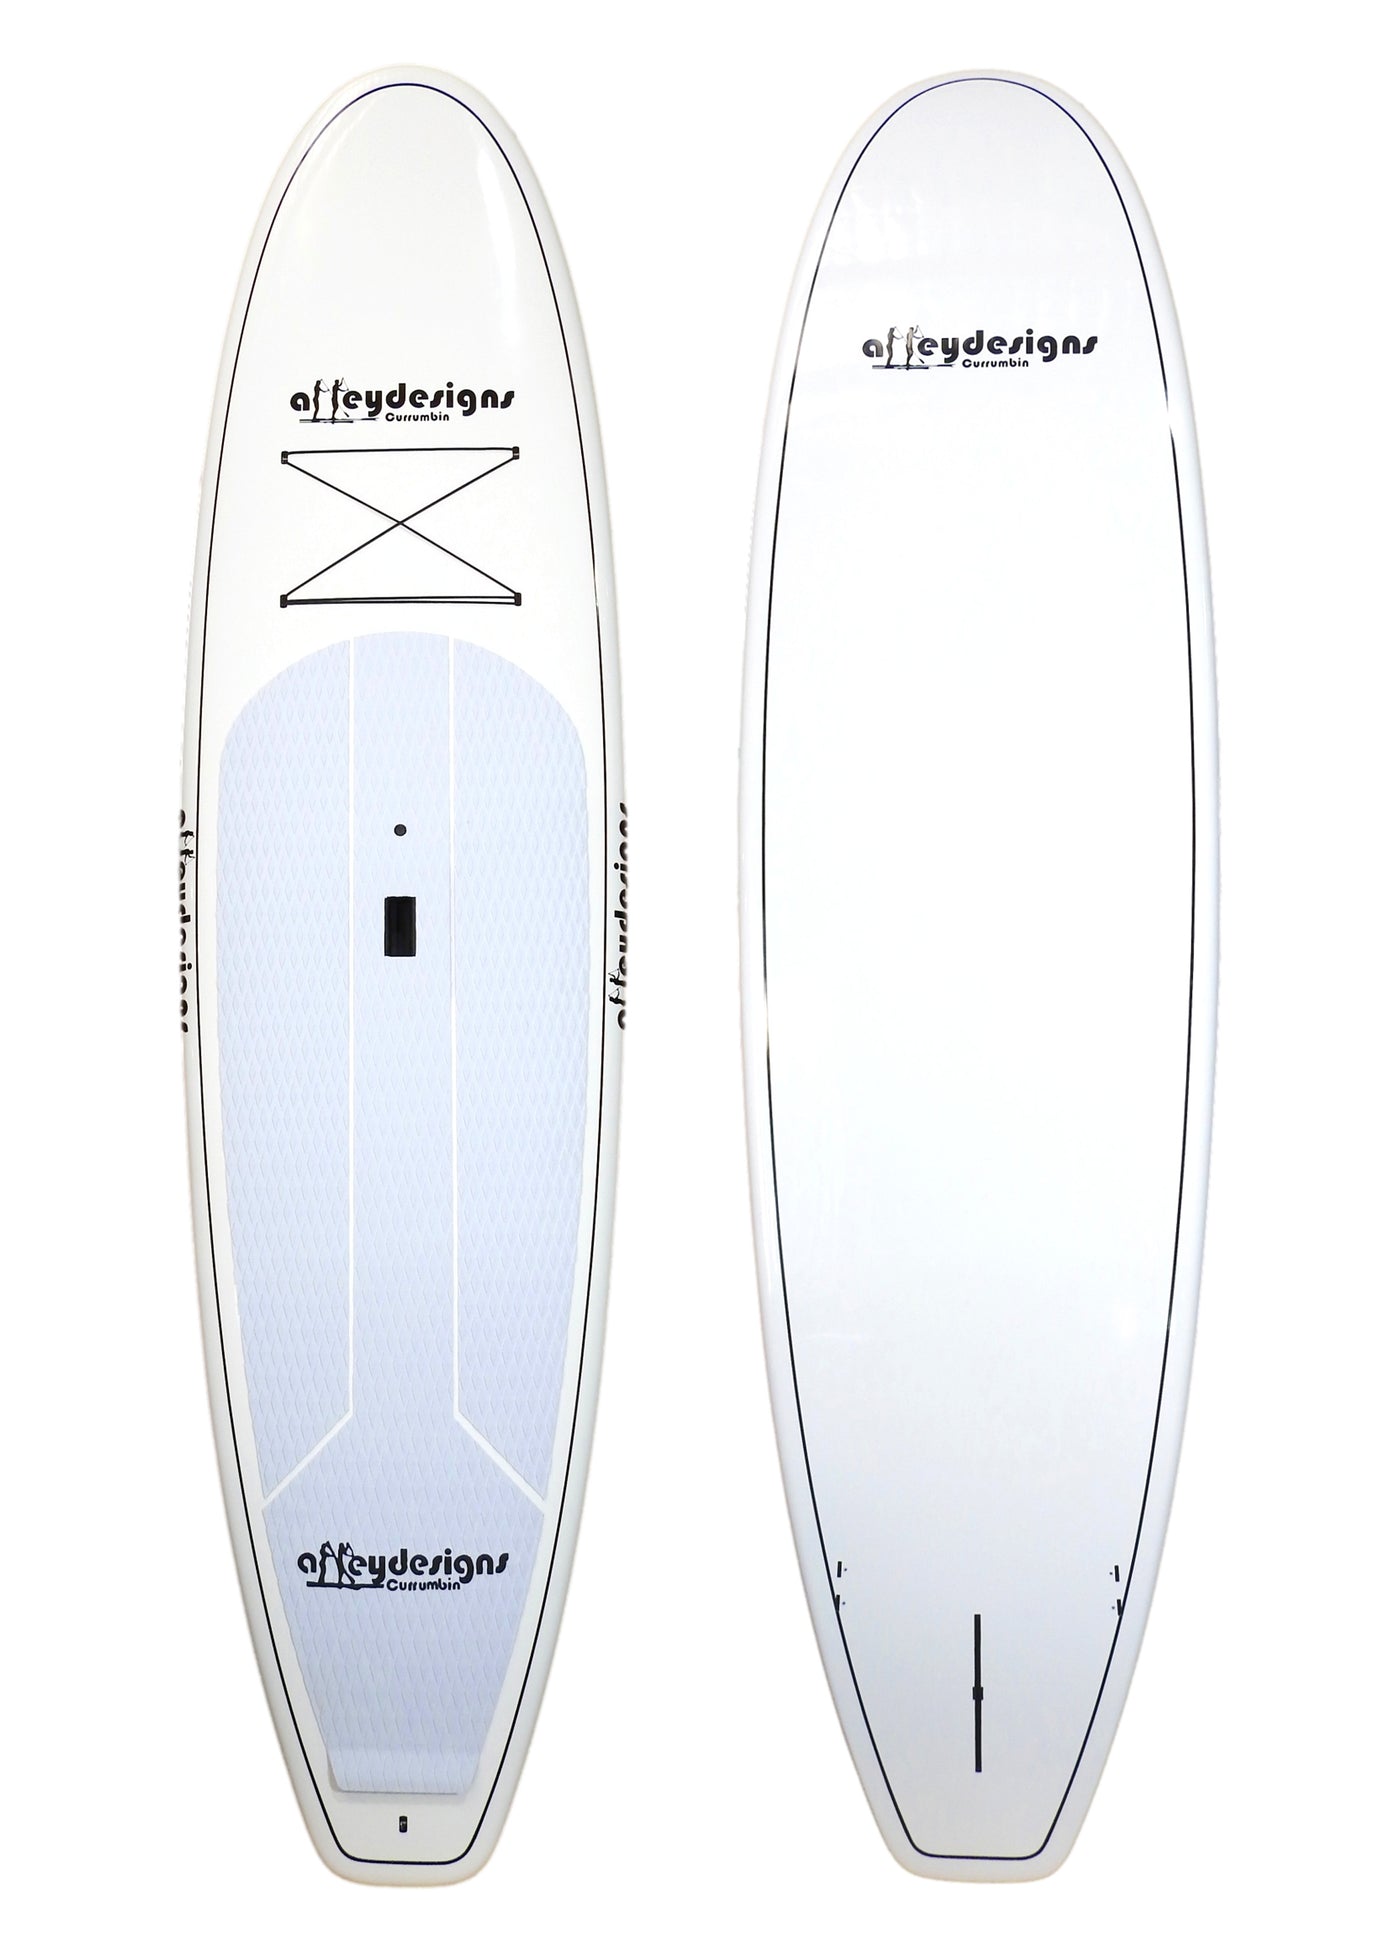 10'6" x 32" White Thermo Mould Classic Alleydesigns SUP - Alleydesigns  Pty Ltd                                             ABN: 44165571264